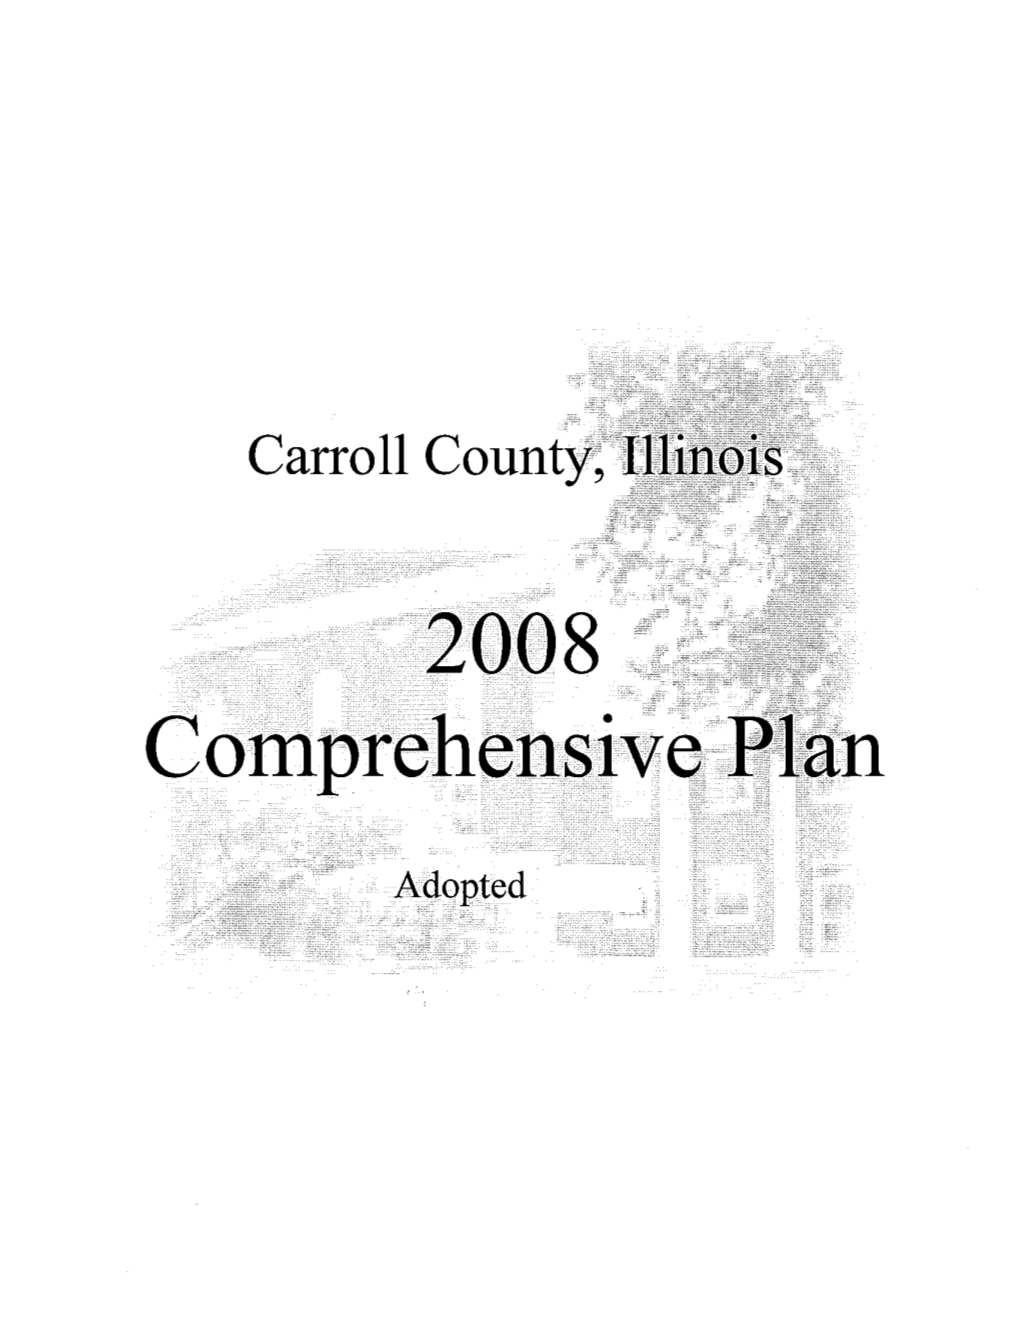 Adopted 2008 Comprehensive Plan Carroll County, Illinois